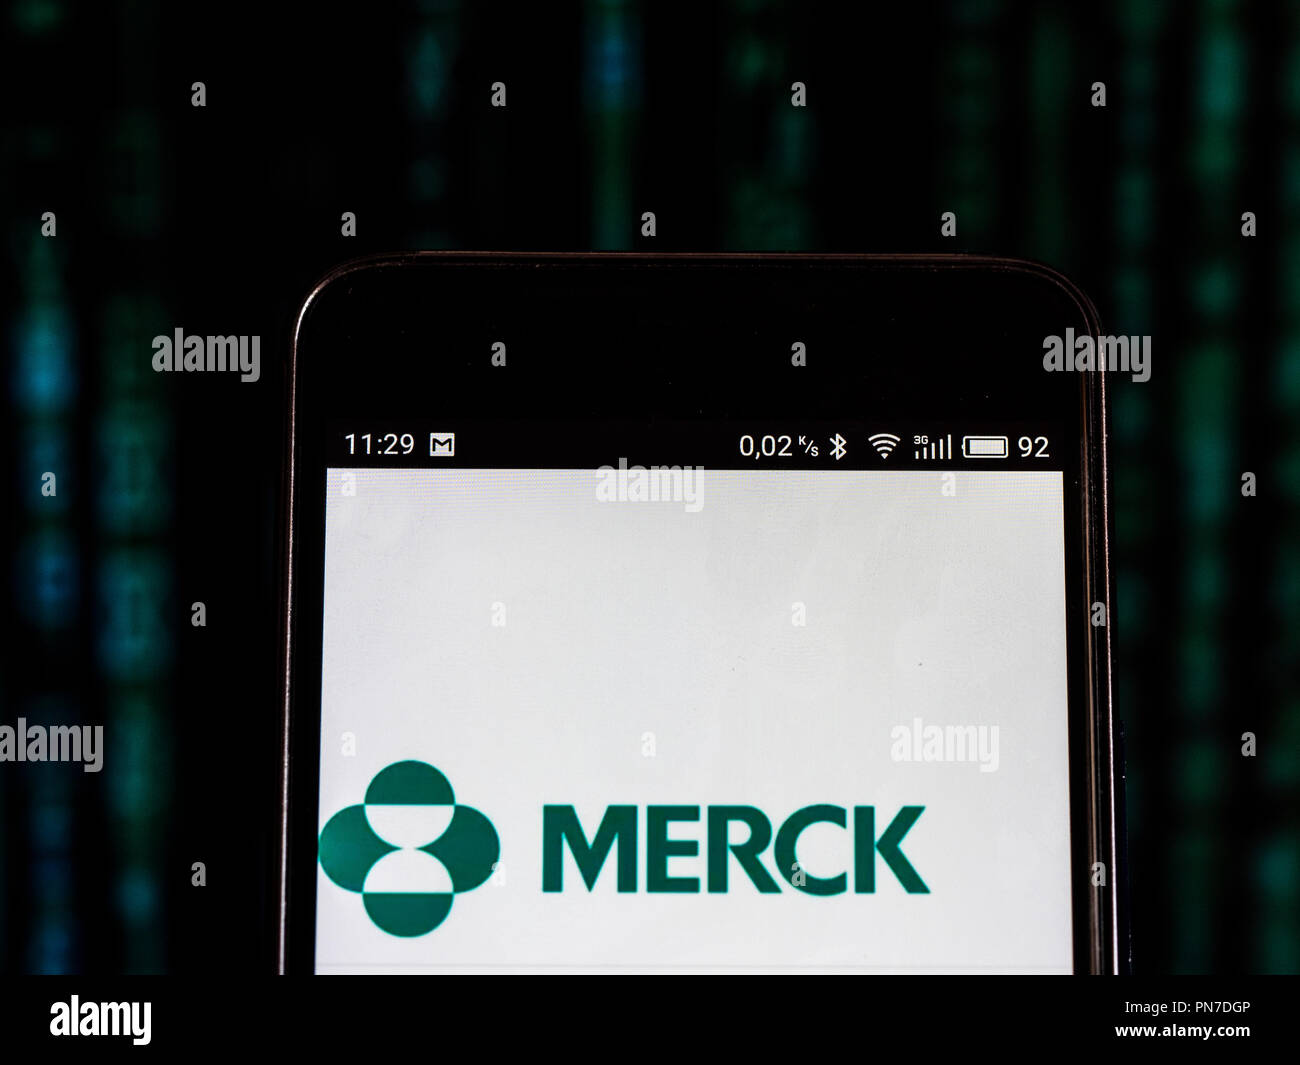 Merck & Co. logo seen displayed on smart phone. Merck & Company, Inc., d.b.a. Merck Sharp & Dohme (MSD) outside the United States and Canada, is an American pharmaceutical company and one of the largest pharmaceutical companies in the world. Stock Photo